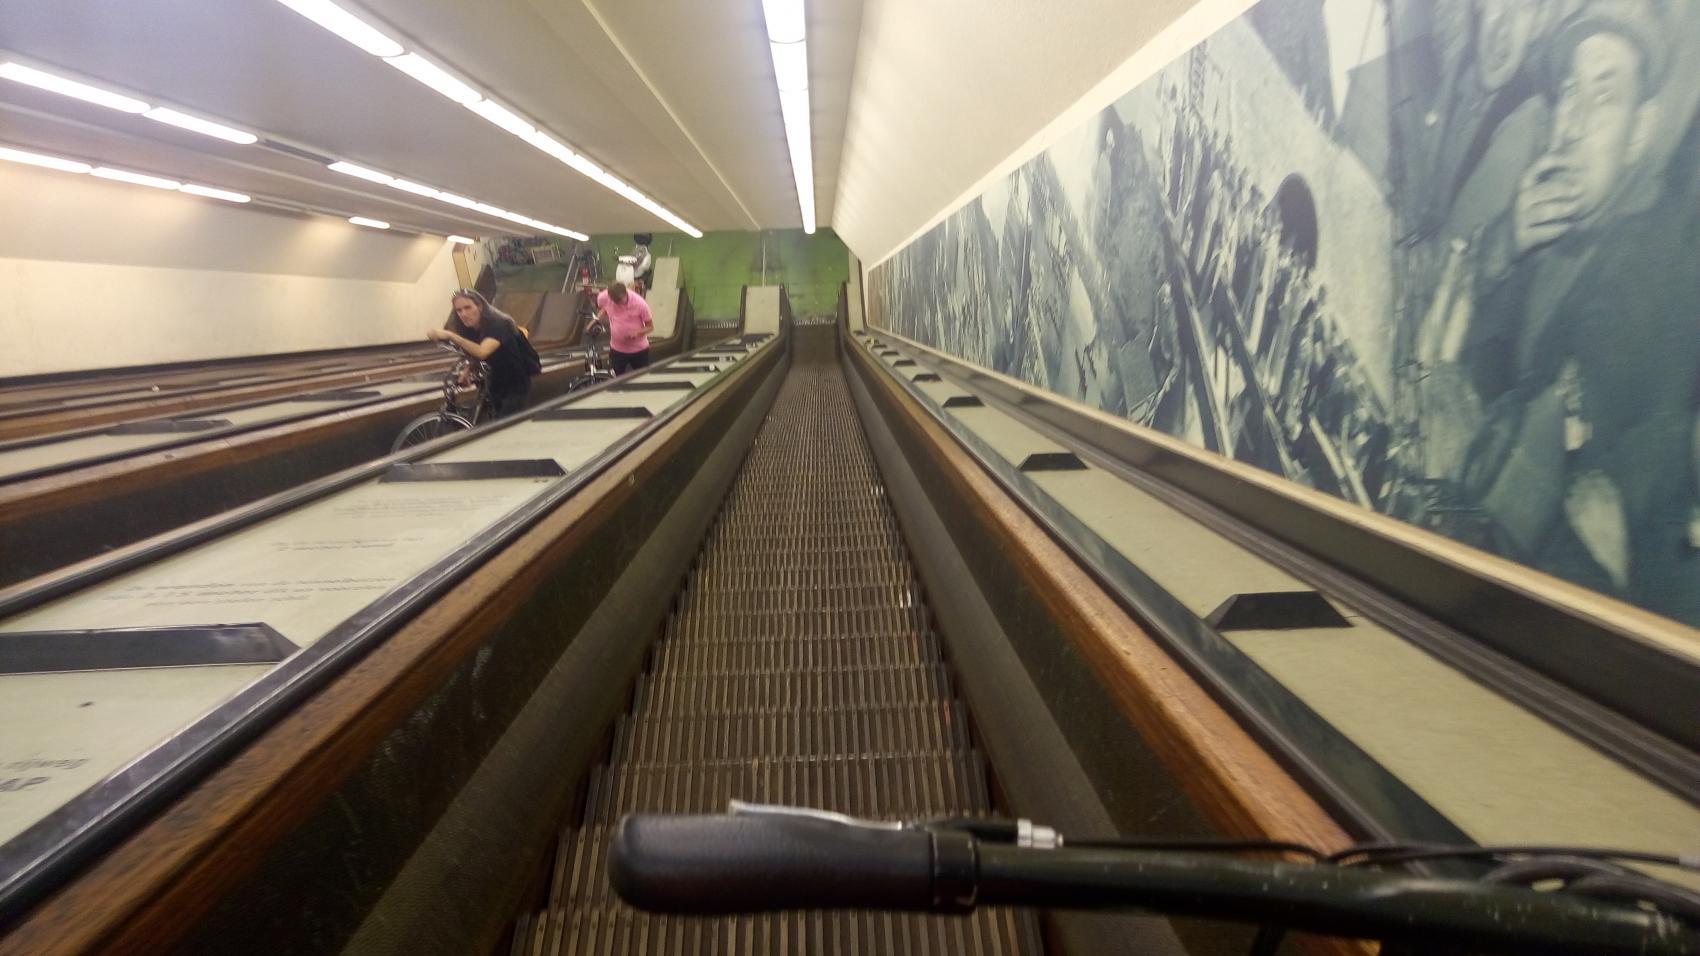 Most of cyclists use escalators to get to and from the tunnel level.